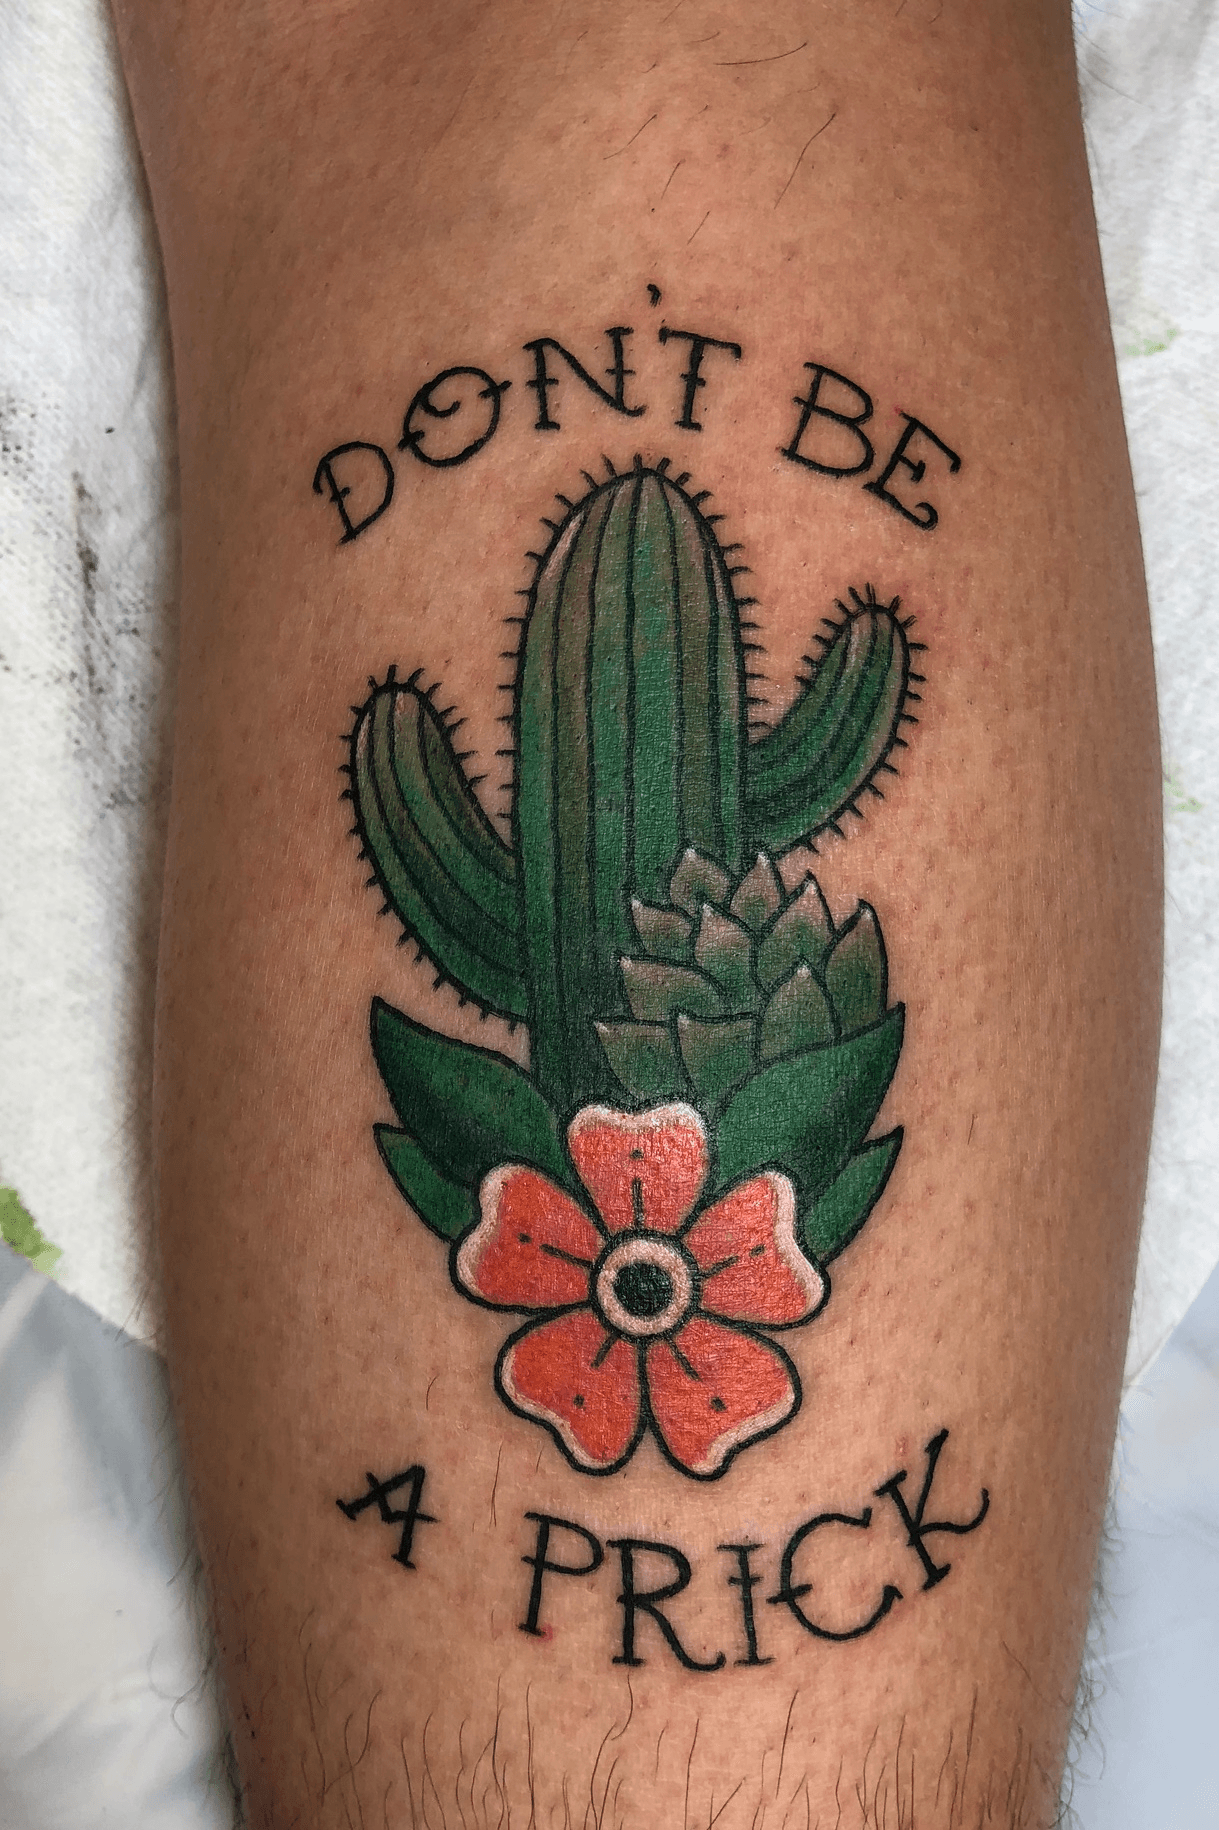 Tattoo uploaded by Darlon • #cacto #cactus #oldschooltattoo